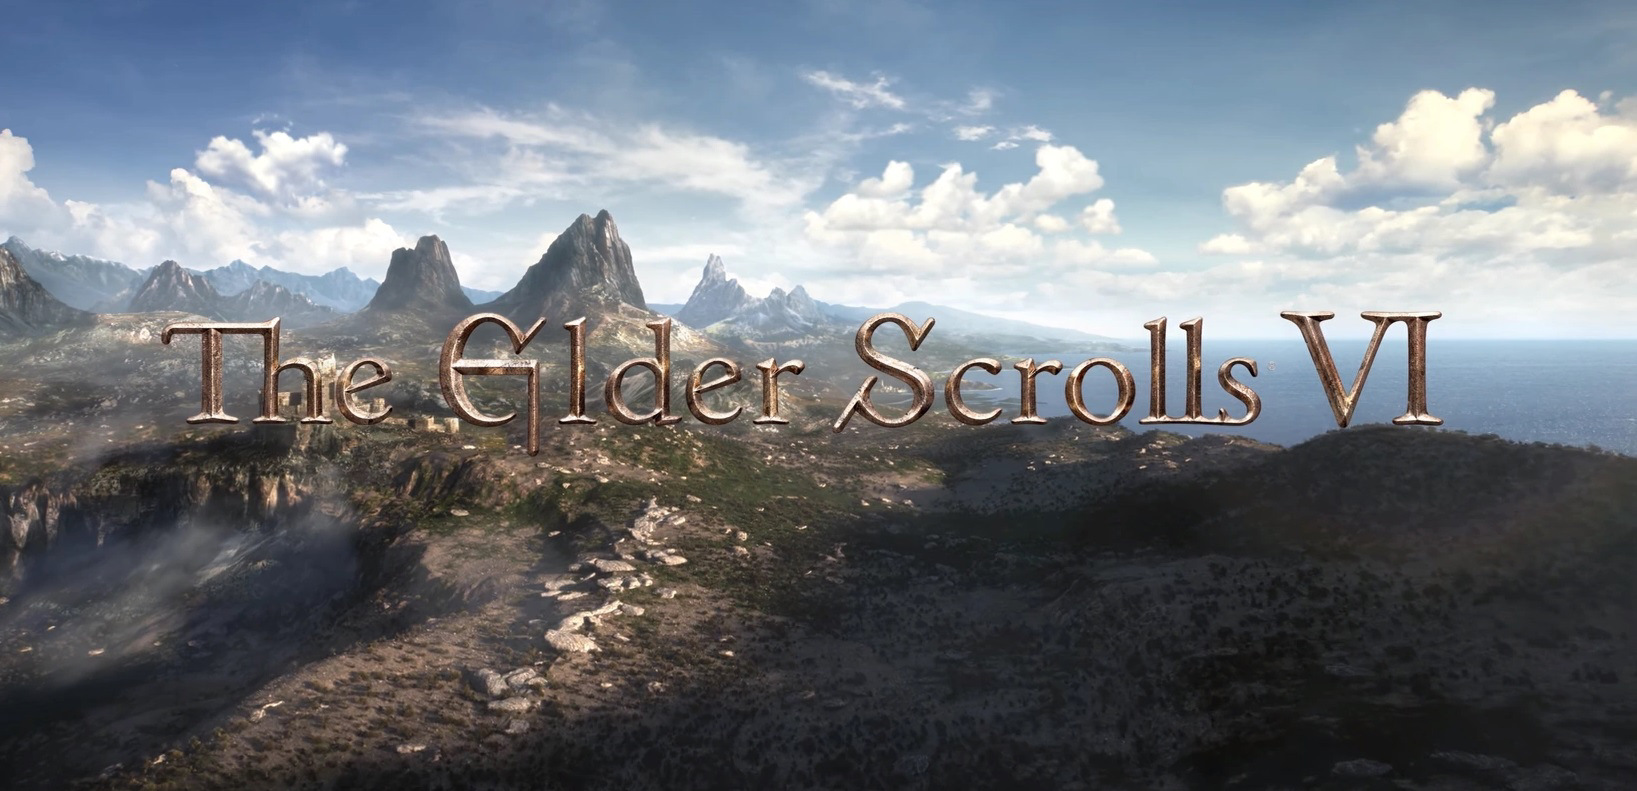 Xbox Boss Wishy-Washy on Whether The Elder Scrolls 6 Will Come to